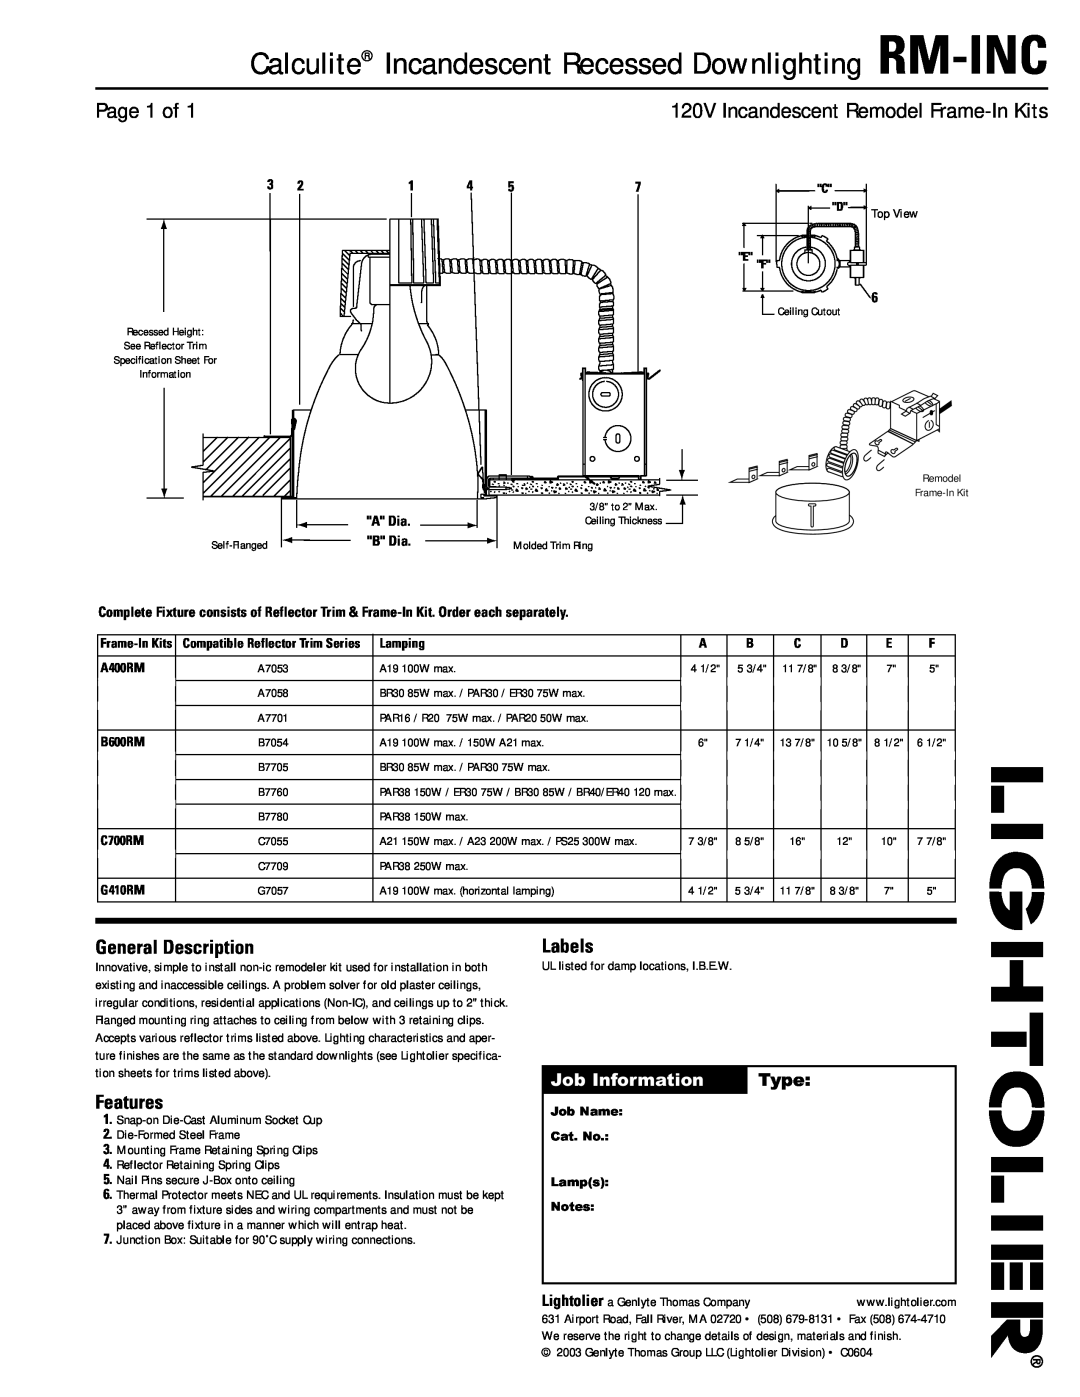 Lightolier RM-INC specifications Page 1 of, 120V Incandescent Remodel Frame-InKits, General Description, Features, Labels 